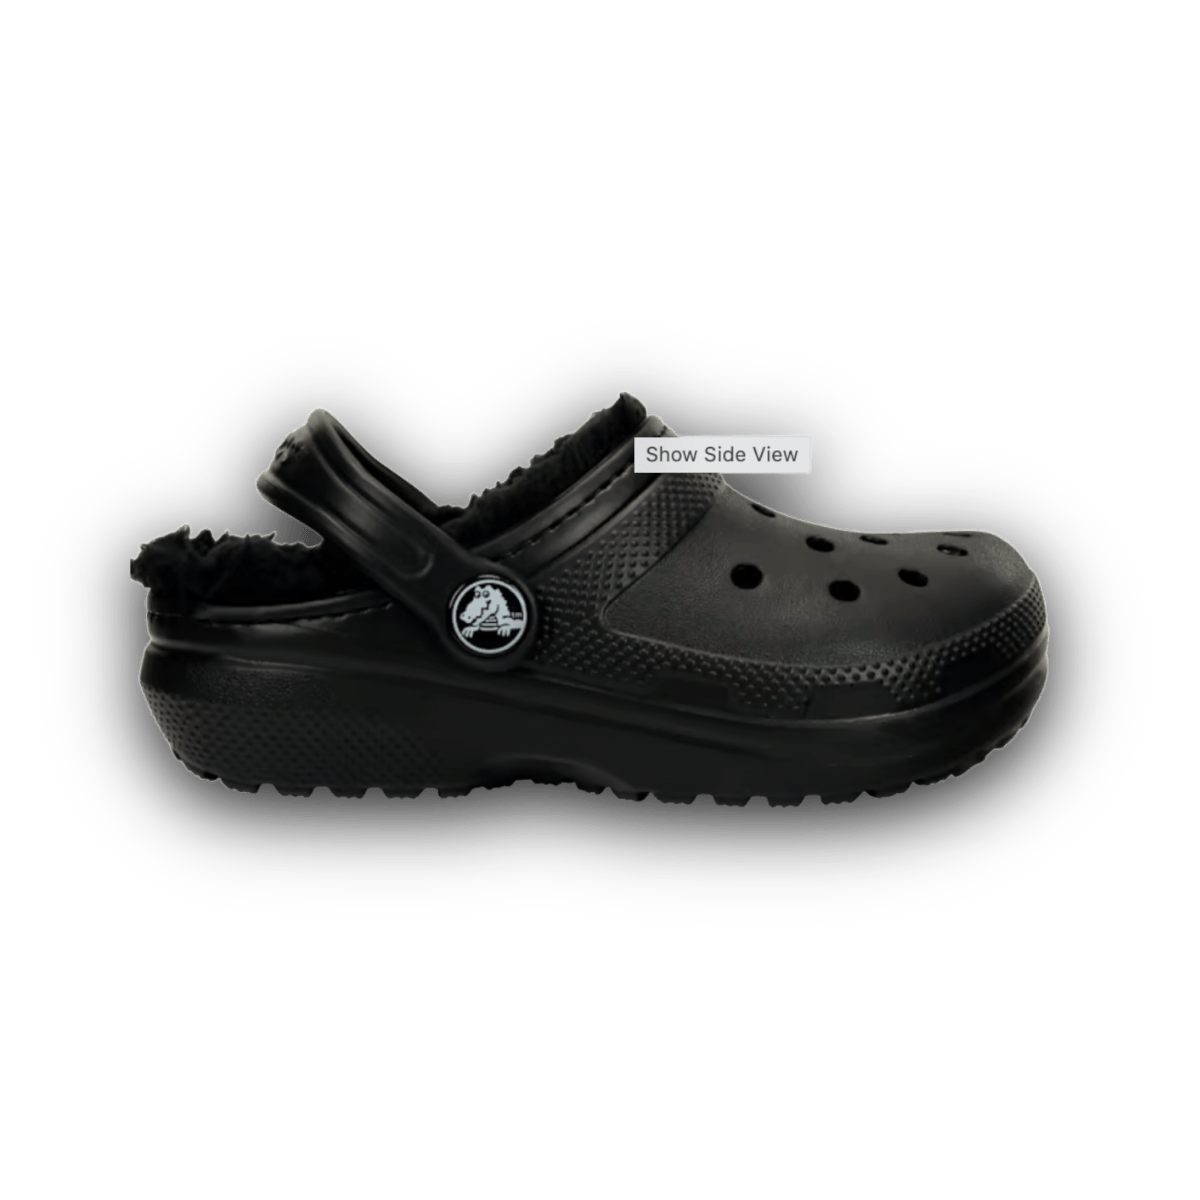 Classic Lined Clog - Toddler - Shoes - Jawns on Fire Sneakers & Streetwear